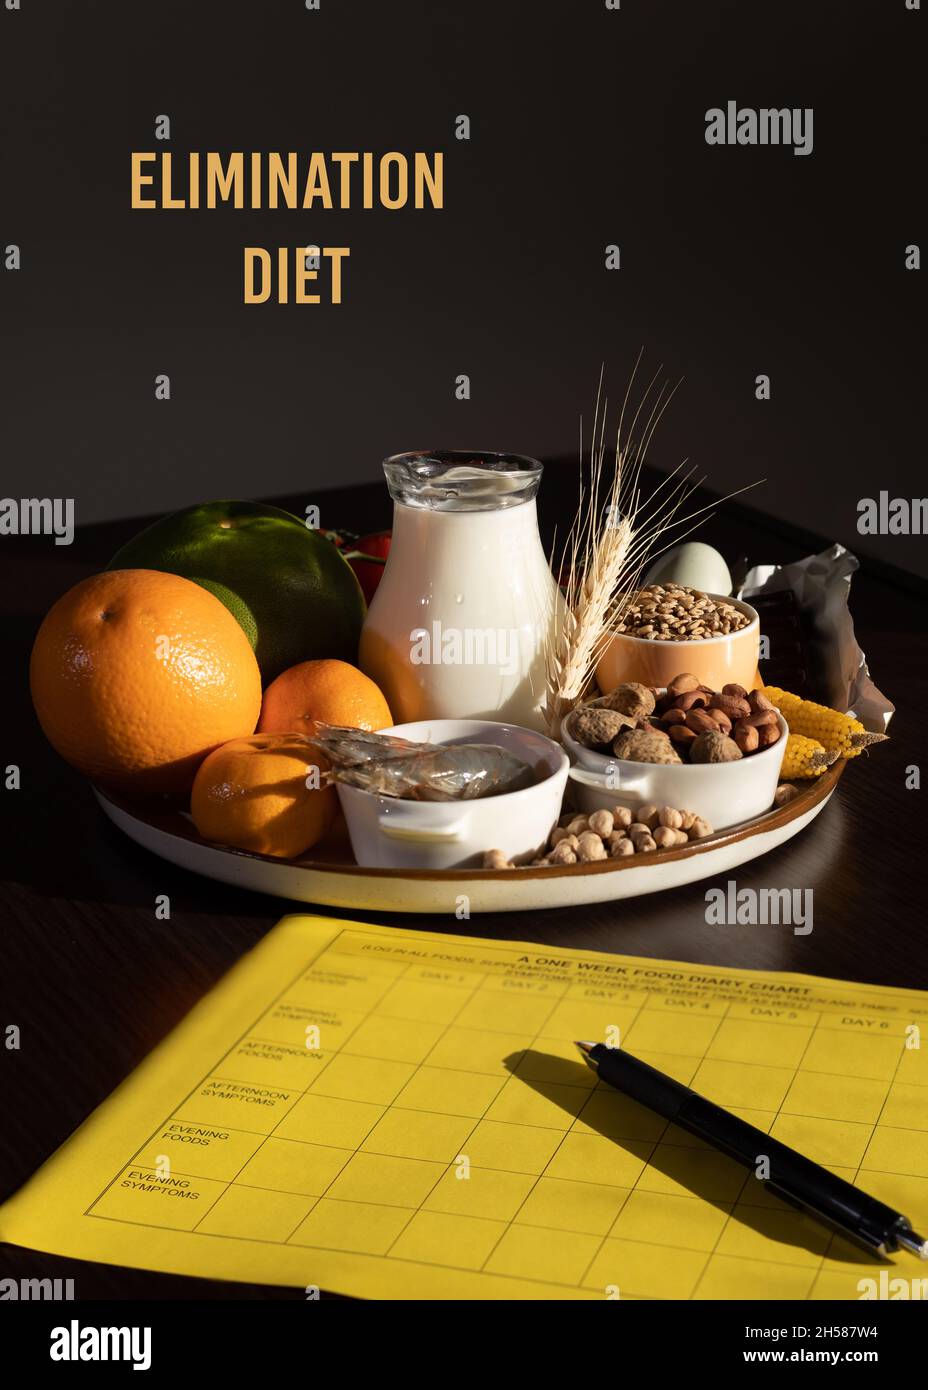 Elimination diet concept. Food allergens on plate - fish, seafood, dairy, peanuts, tree nuts, eggs, chocolate, wheat, soy, citrus fruits. Stock Photo